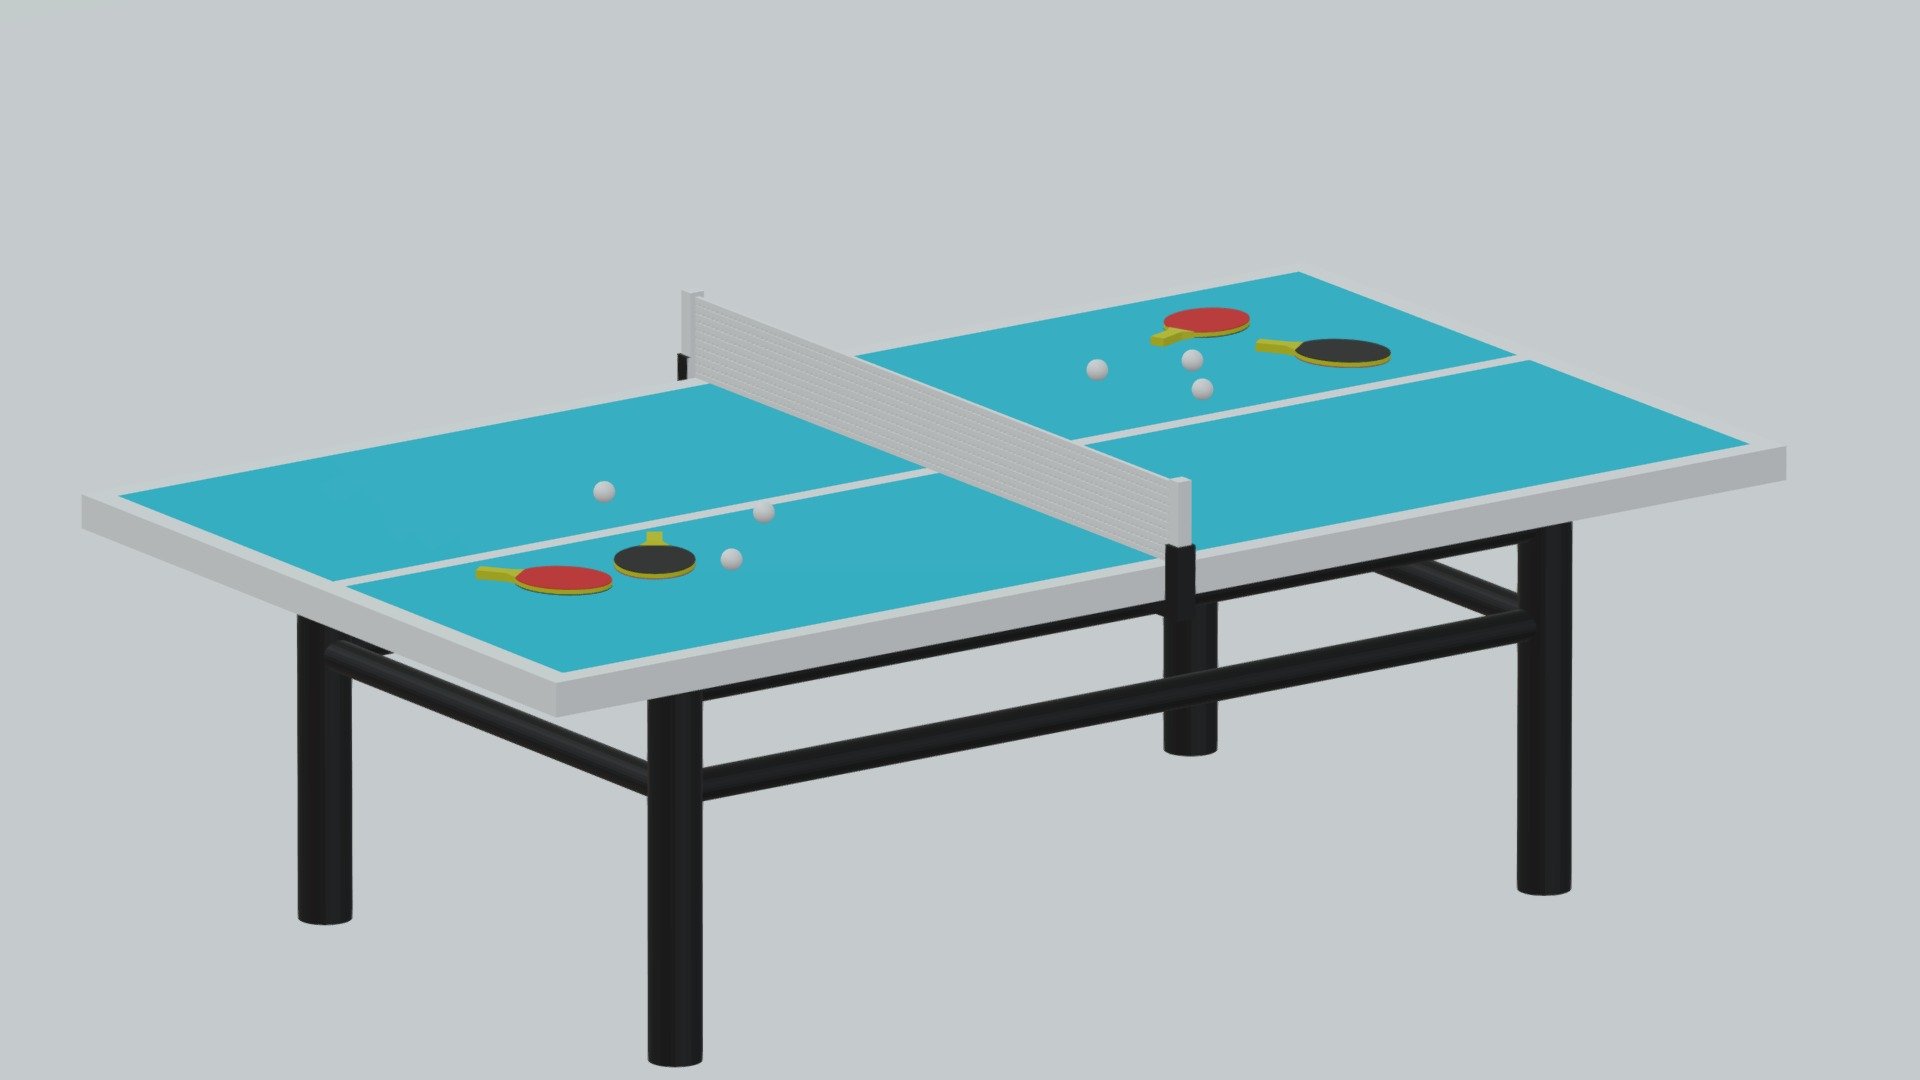 -Table Tennis Ping Pong.

-This product contains 11 models.

-This product was created in Blender 2.8.

-vertices: 8,338 , polygons: 7,812.

-Formats: blend, fbx, obj, c4d, dae, fbx.

-We hope you enjoy this model.

-Thank you 3d model